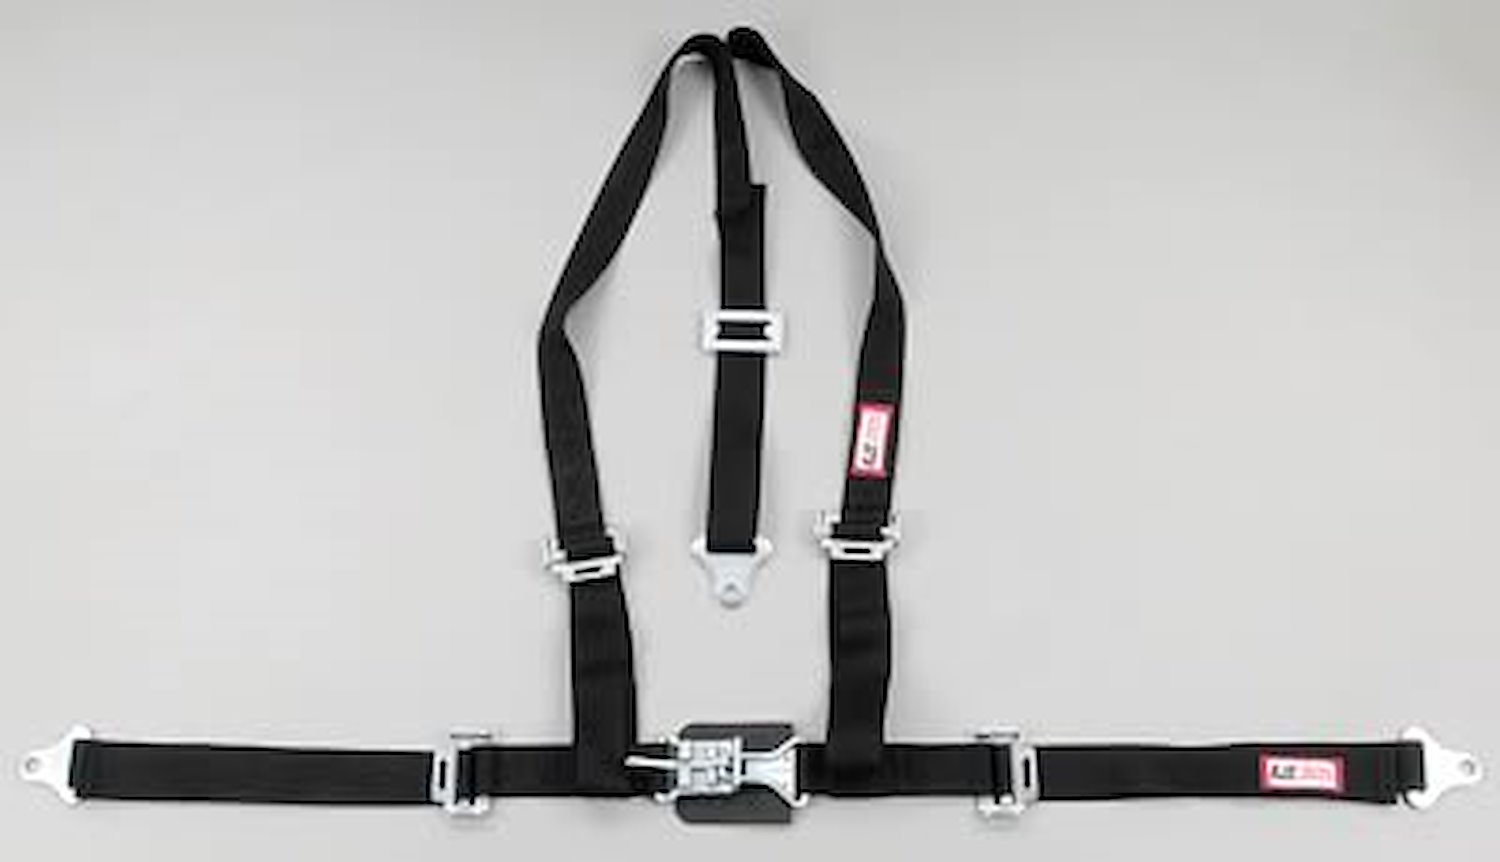 NON-SFI L&L HARNESS 3 PULL UP Lap BELT SNAP SEWN IN 2 S.H. Y FLOOR Mount w/STERNUM STRAP WRAP/SNAP GRAY